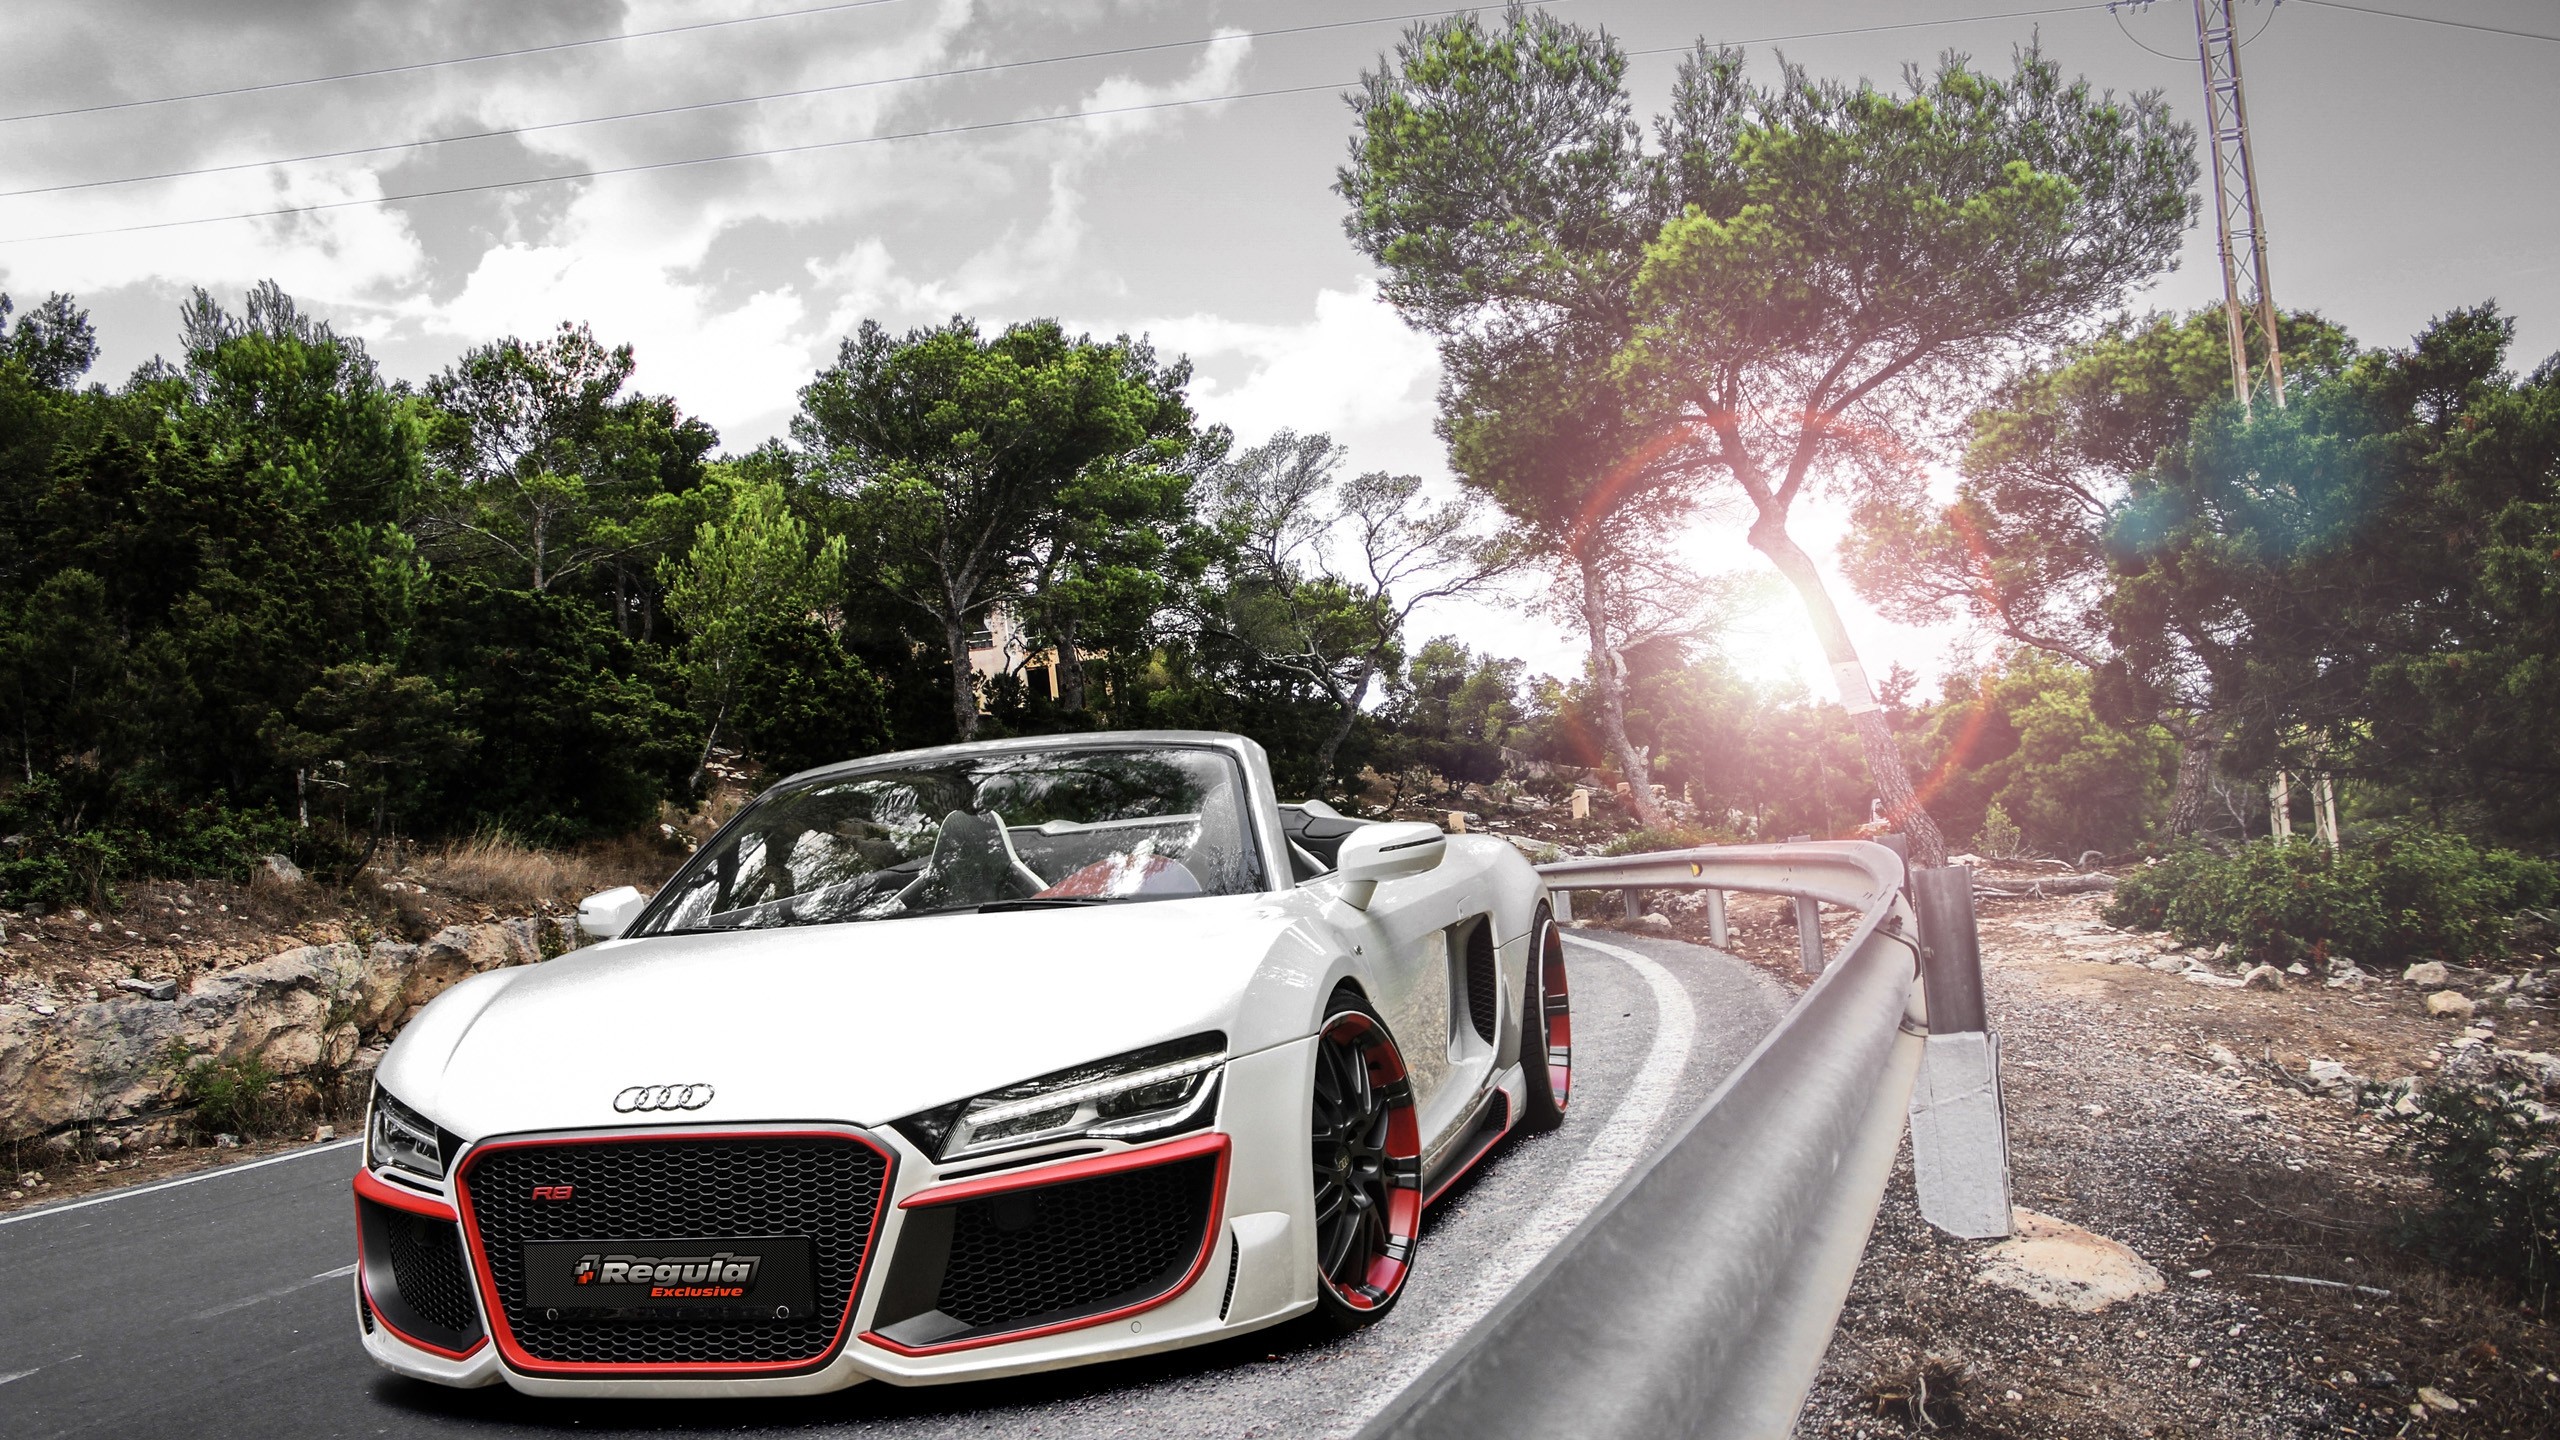 General 2560x1440 Audi Audi R8 white cars trees road vehicle sunlight clouds frontal view car convertible German cars Volkswagen Group